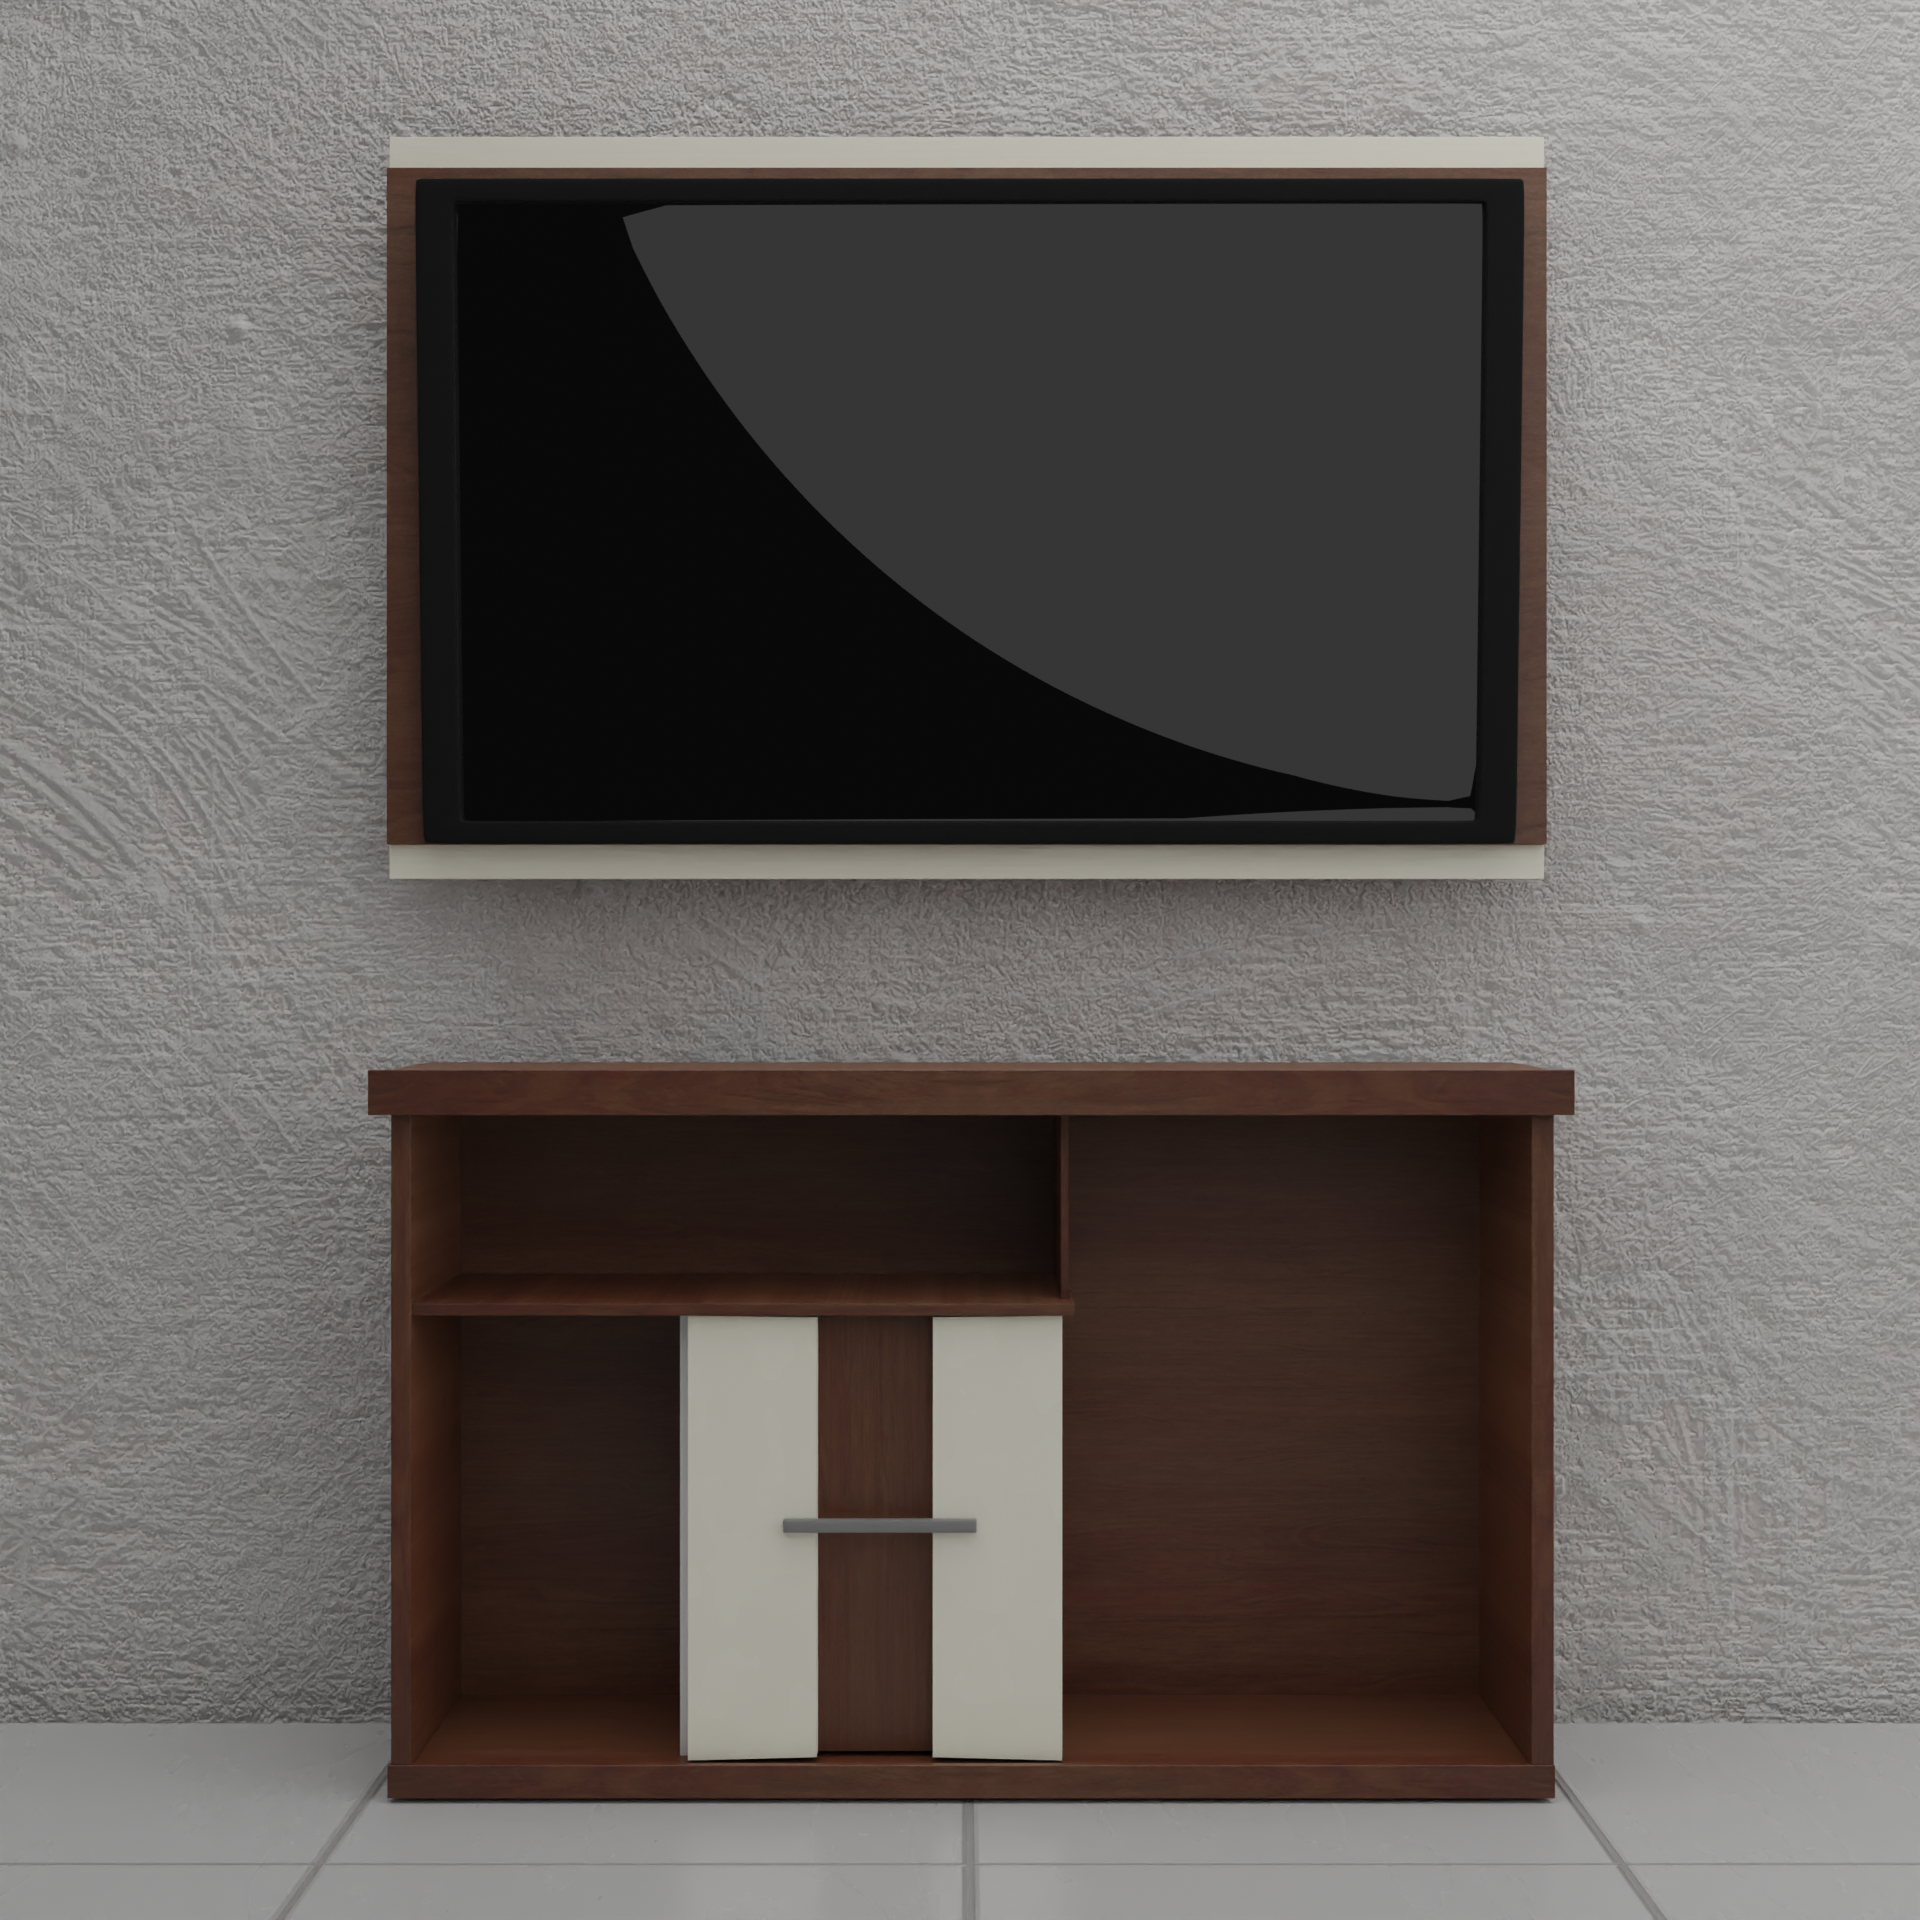 Realistic TV Stand in Blender preview image 1